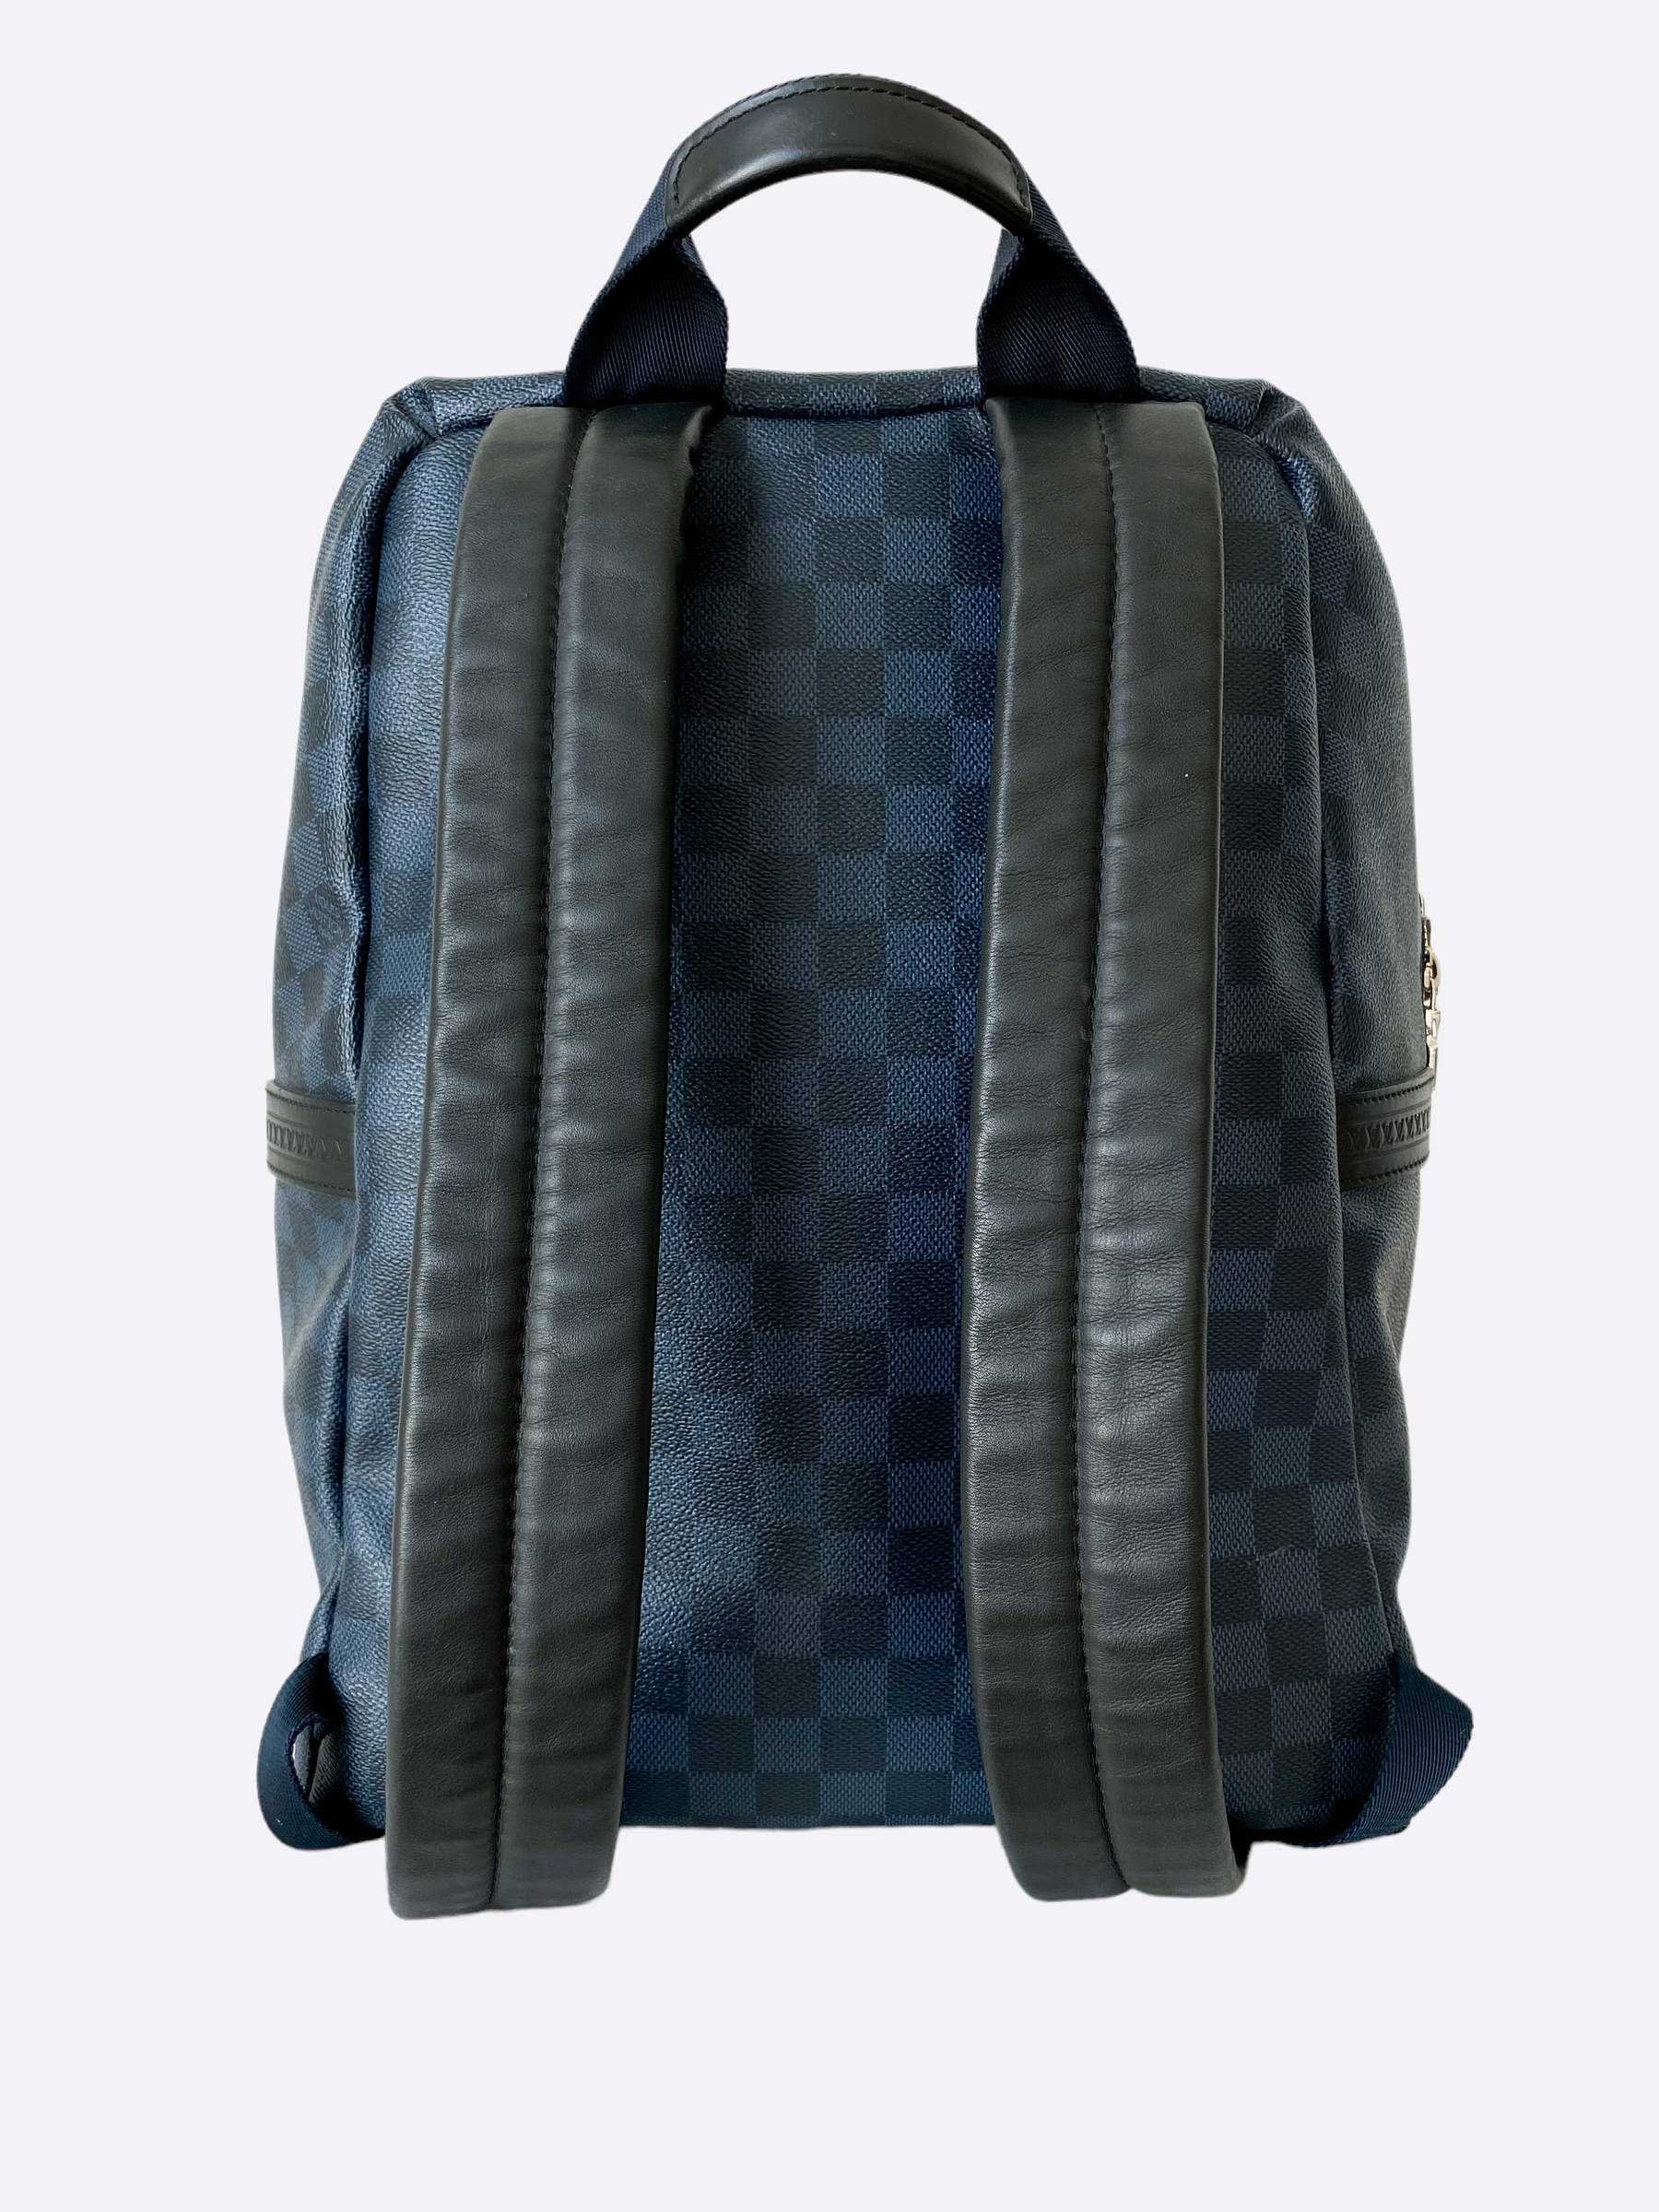 Louis Vuitton Discovery Blue Leather Backpack Bag (Pre-Owned)